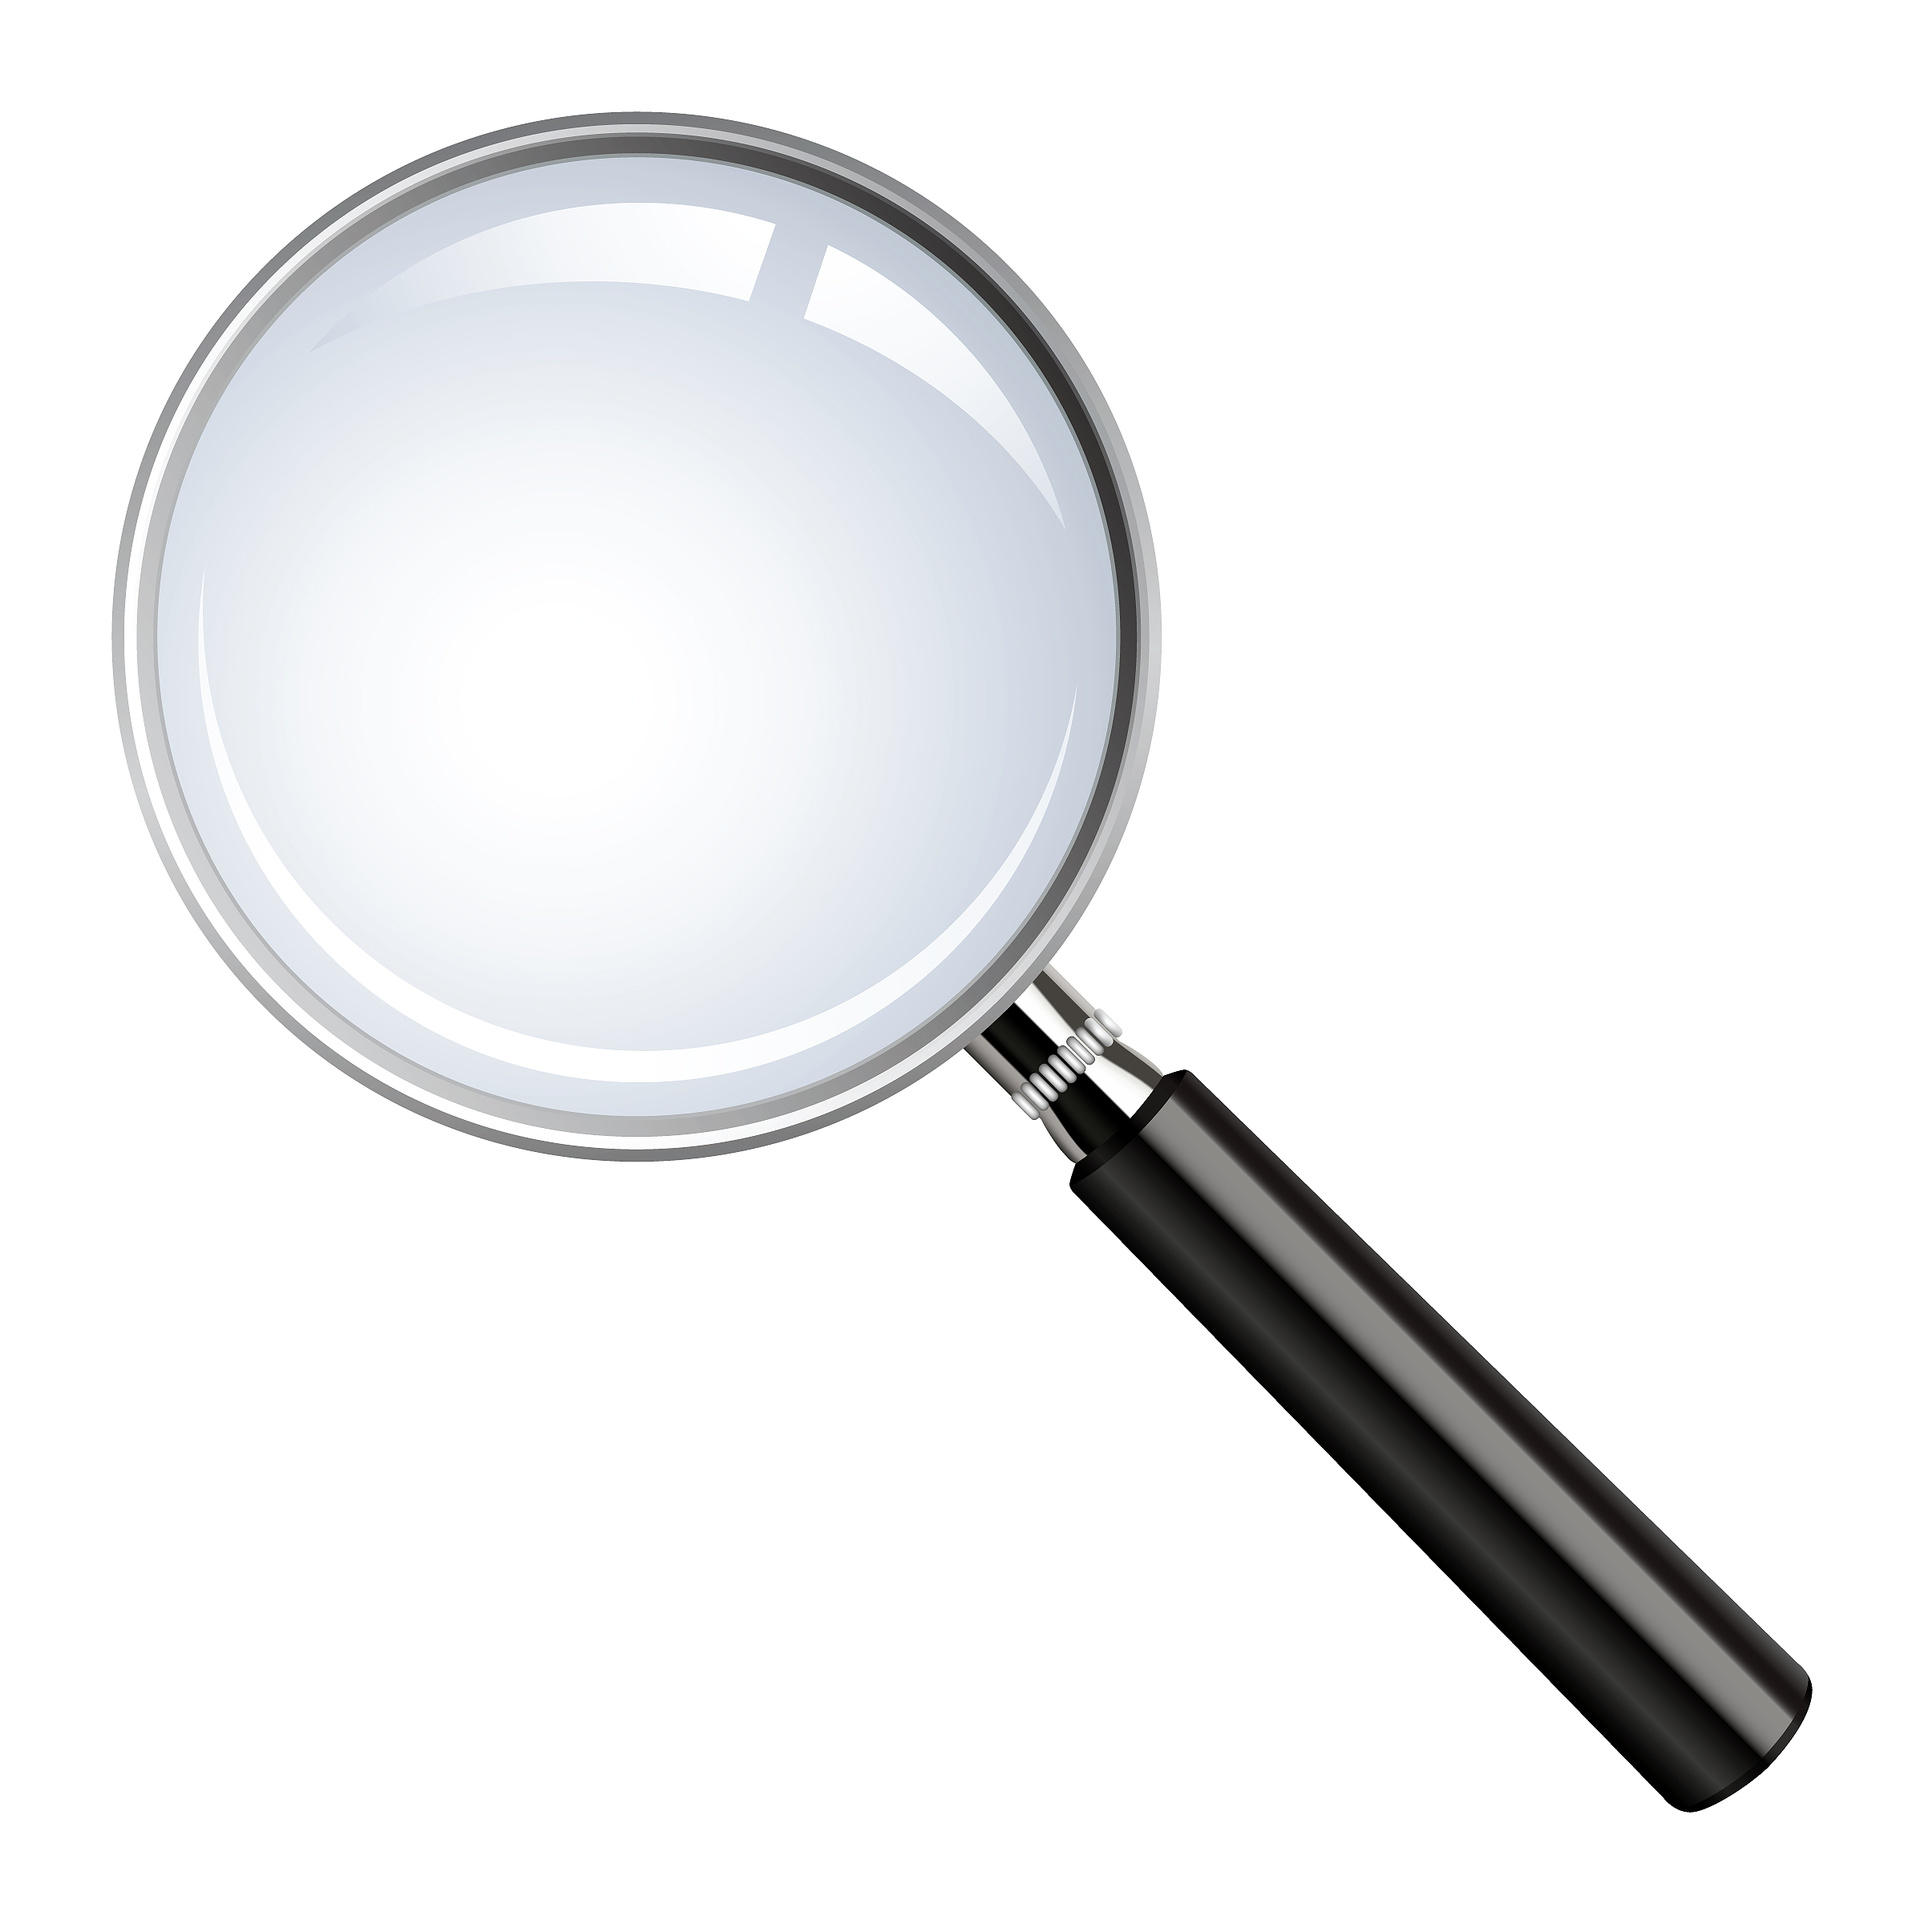 Photo Of Magnifying Glass - ClipArt Best